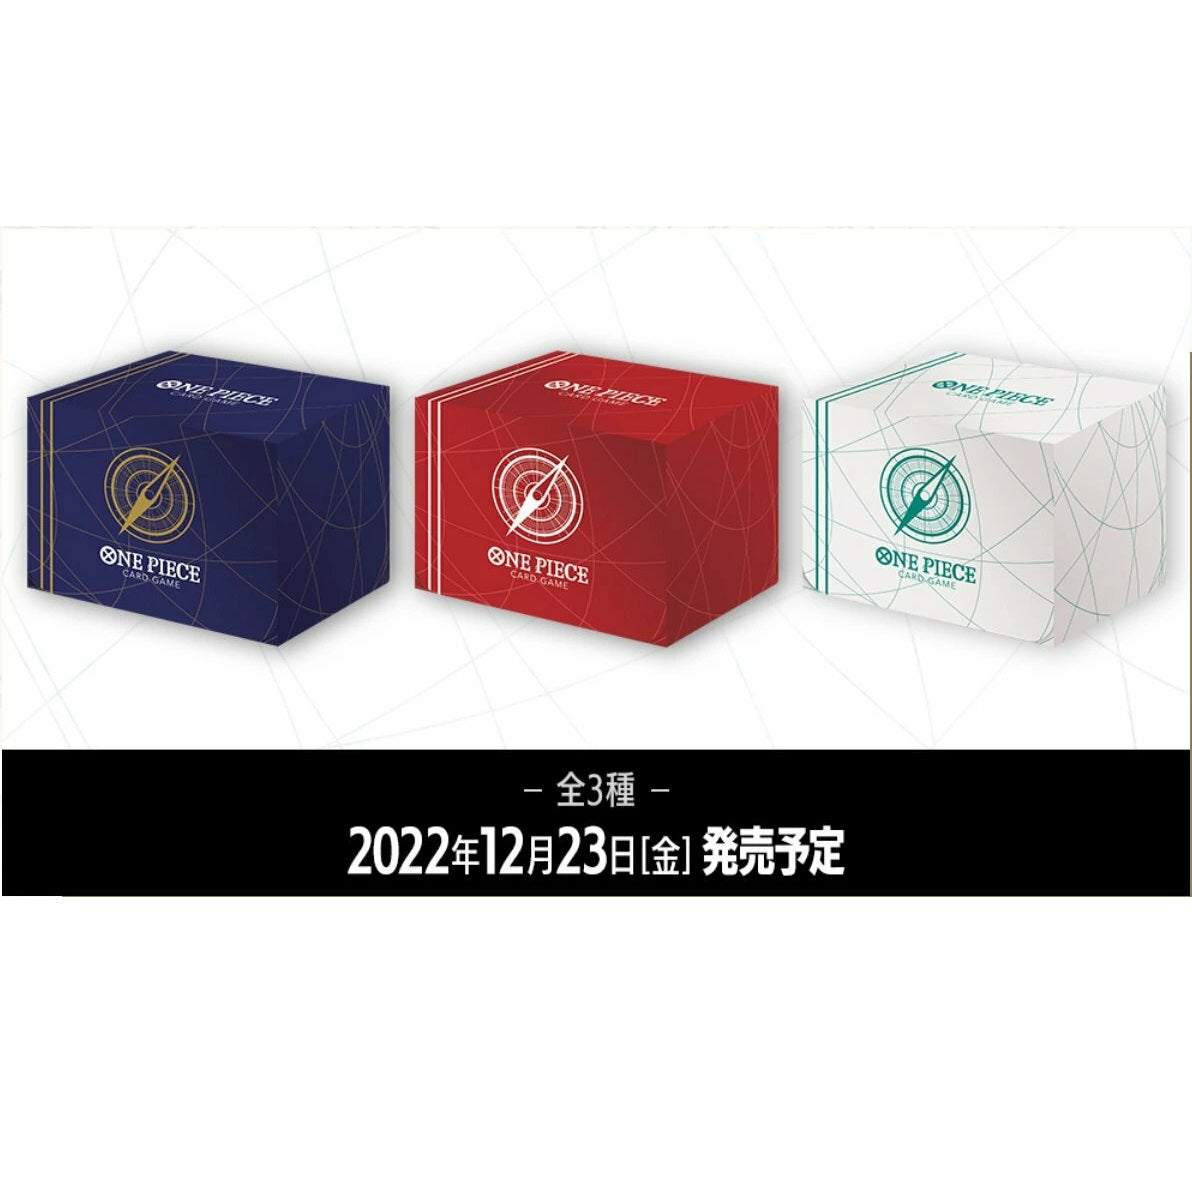 One Piece Card Game Card Case 2022 "Standard Blue"-Bandai-Ace Cards & Collectibles